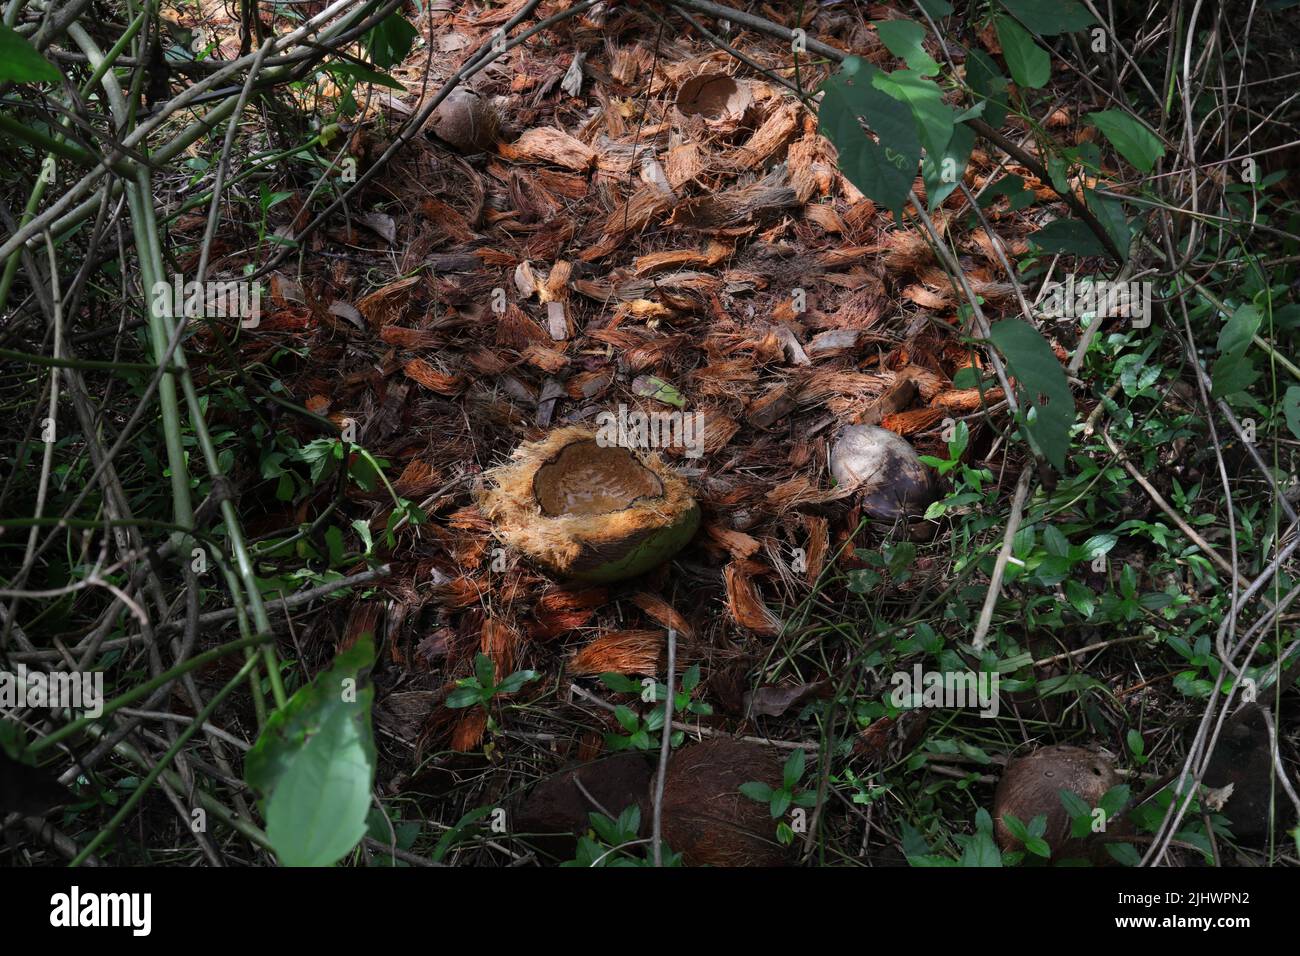 A half eaten coconut fruit with lots of coconut husks on a temporary Porcupines shelter at a forest area Stock Photo